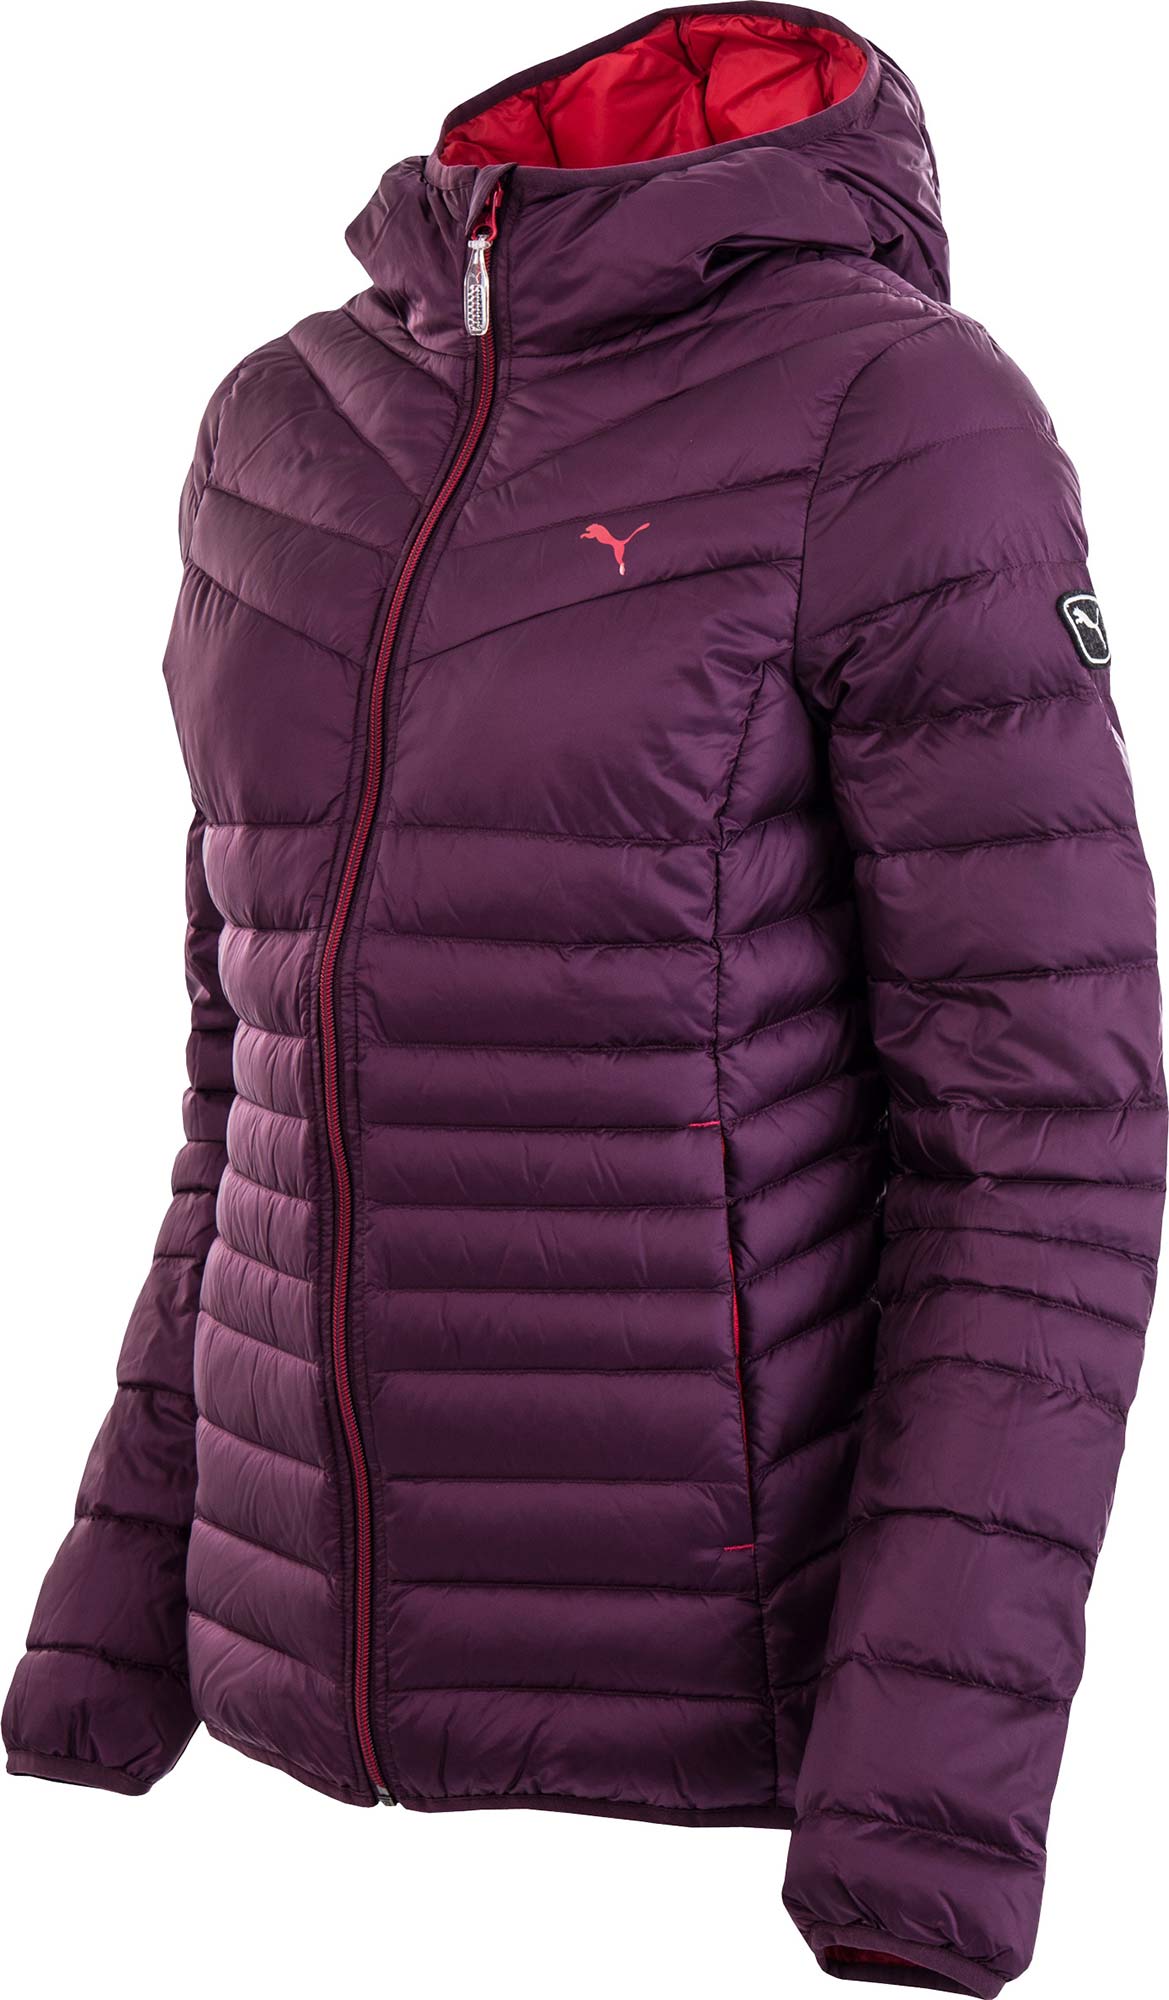 Destroy launch Huge Puma ACTIVE 600 PACKLIGHT HOODED DOWN JACKET | sportisimo.com